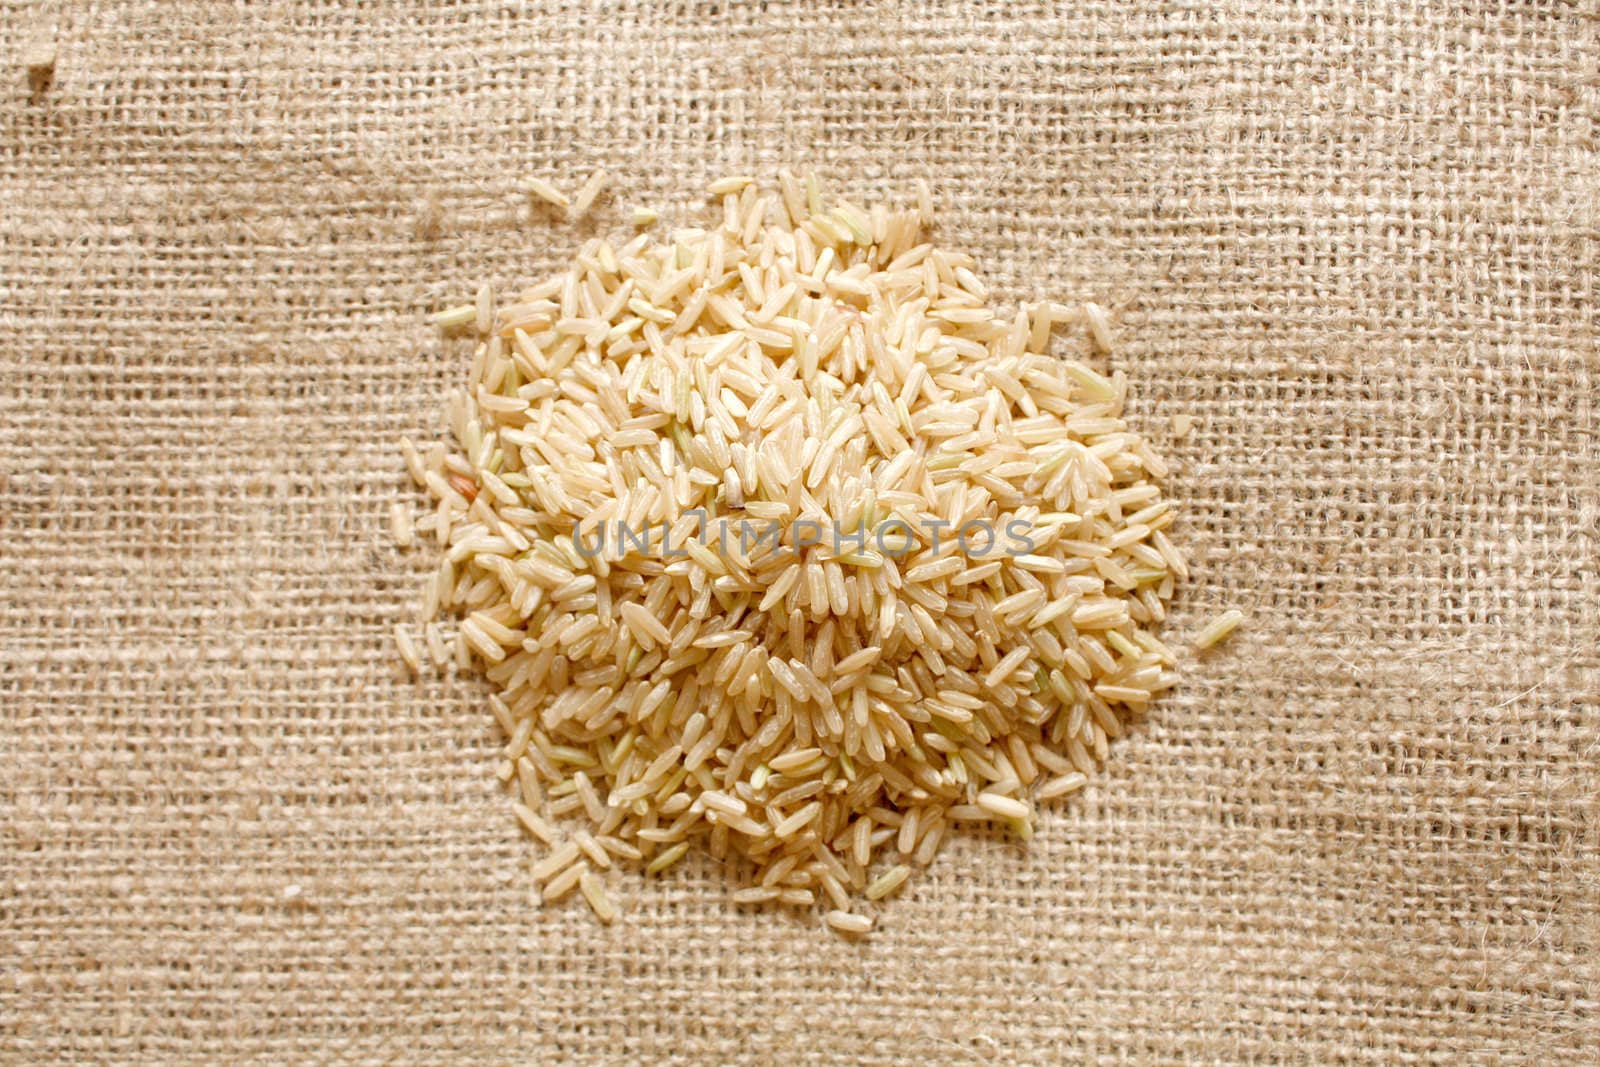 Brown rice on a textile background